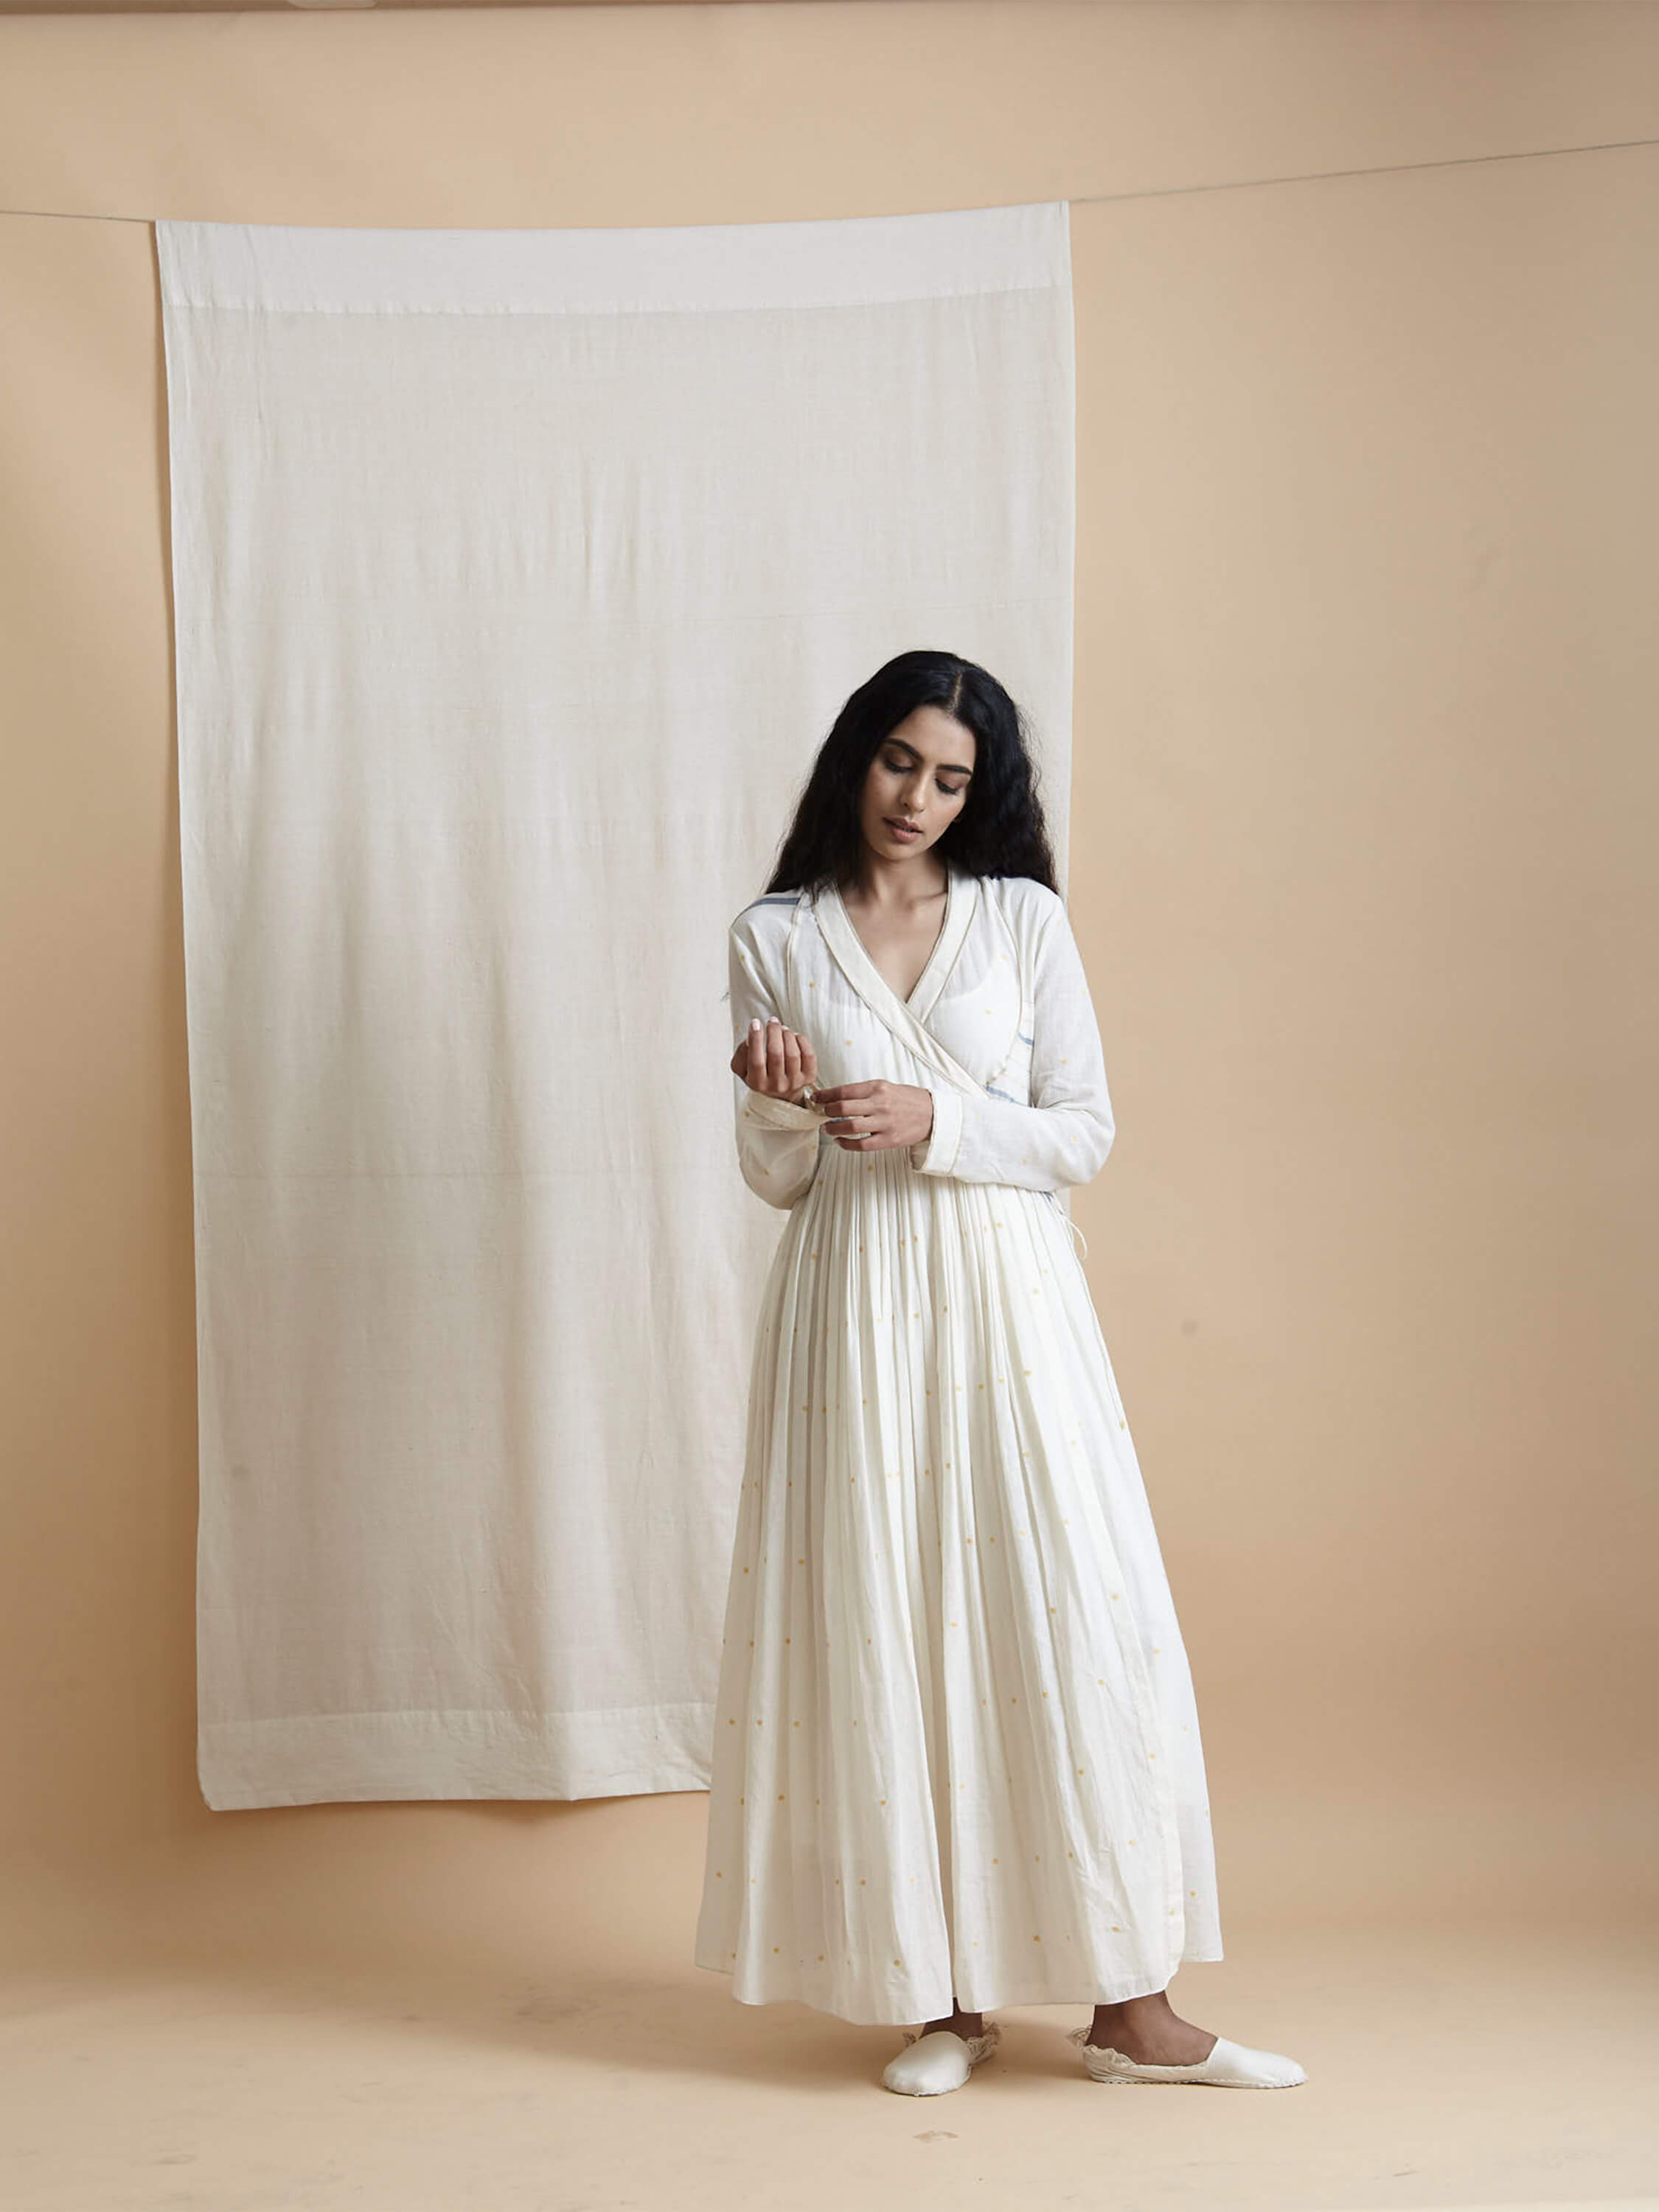 Woman in white maxi dress standing against beige background curtain.